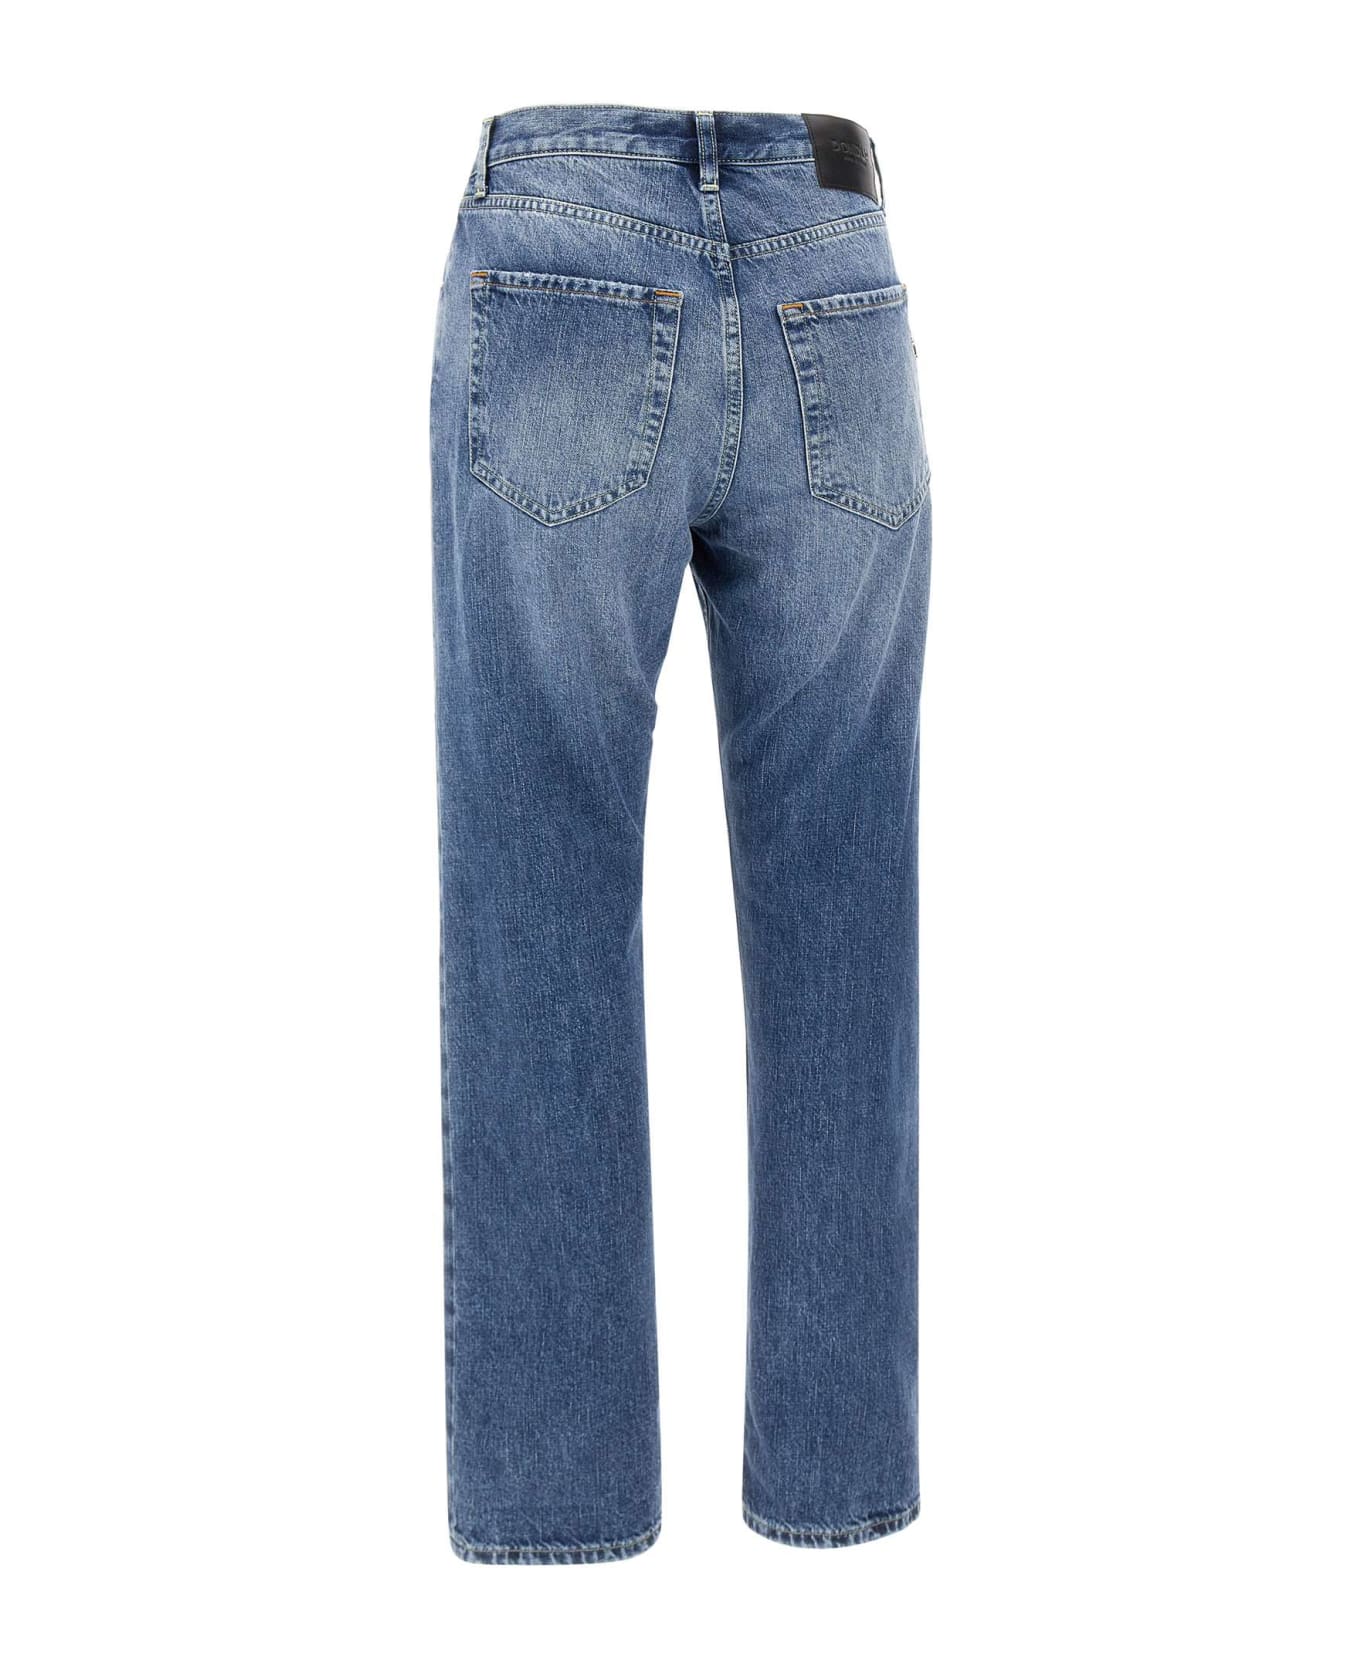 Dondup "icon" Jeans - BLUE